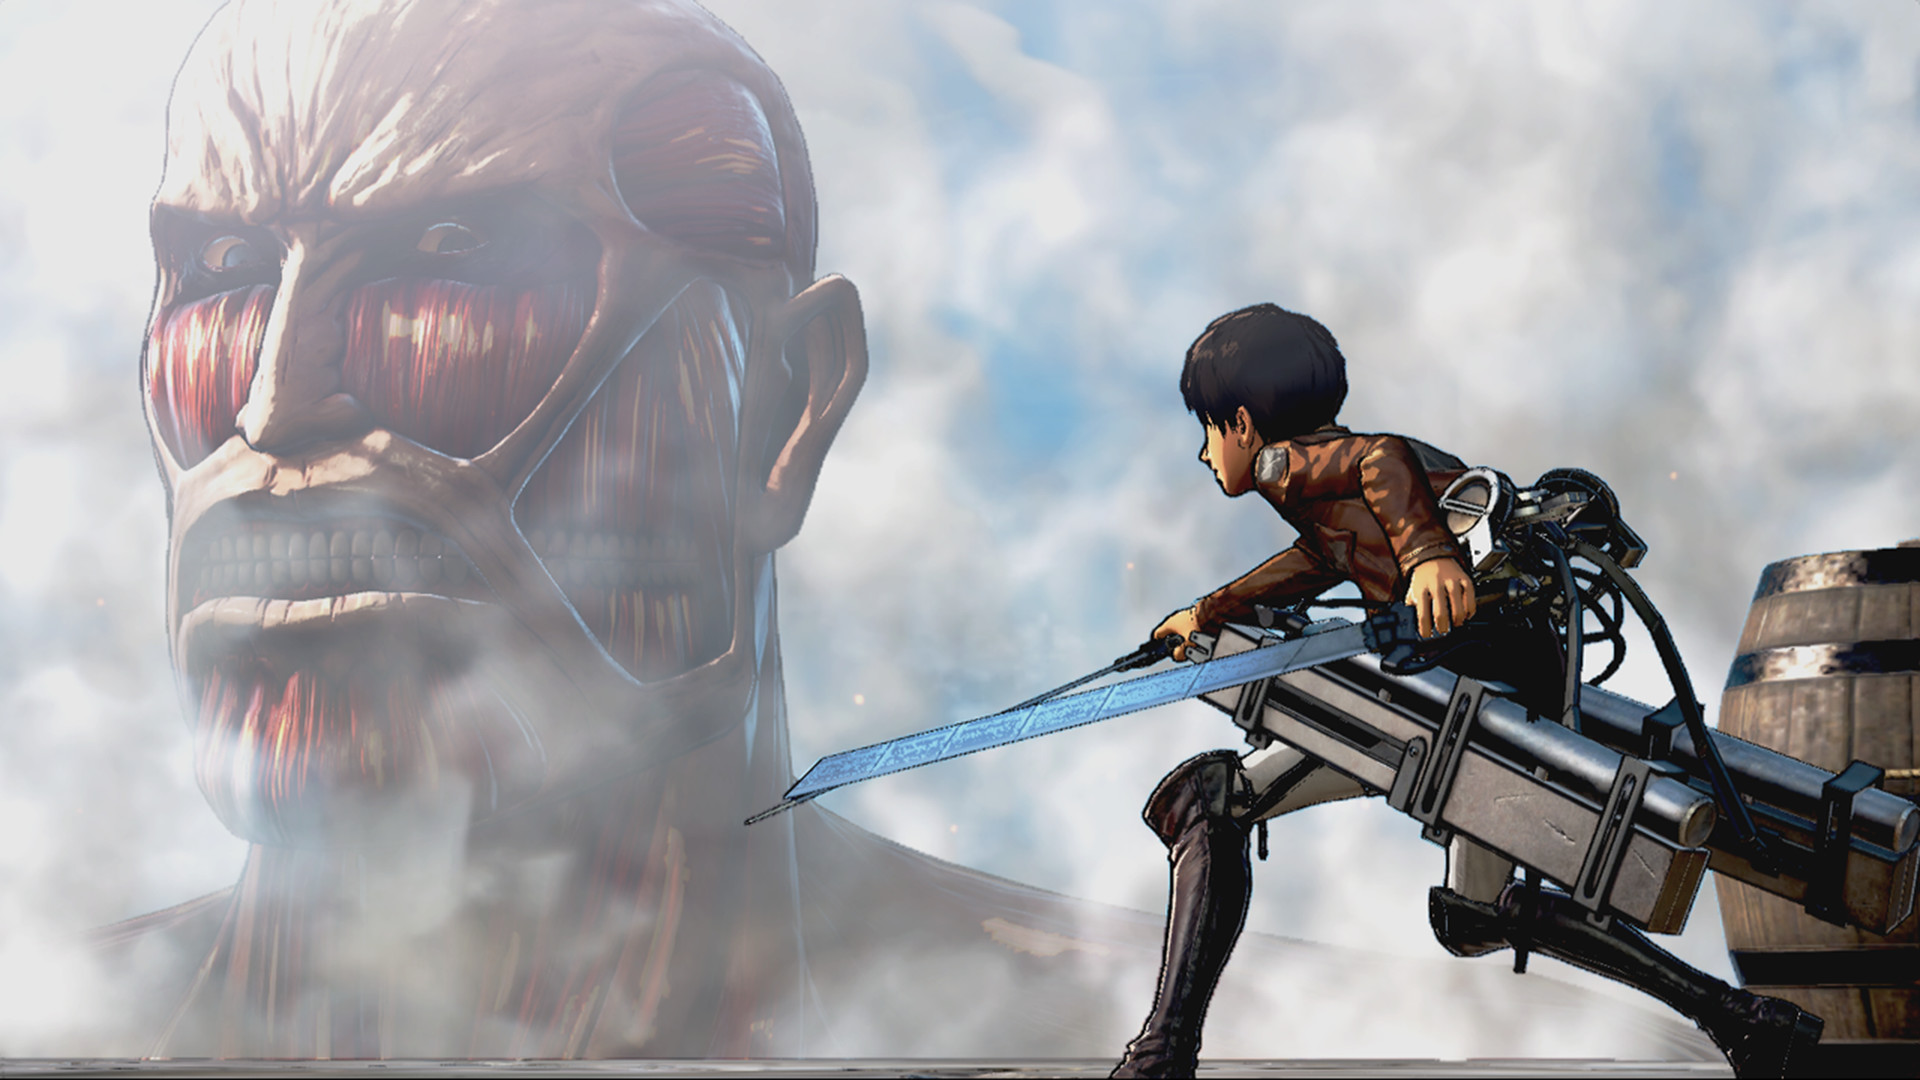 attack on titan games for pc